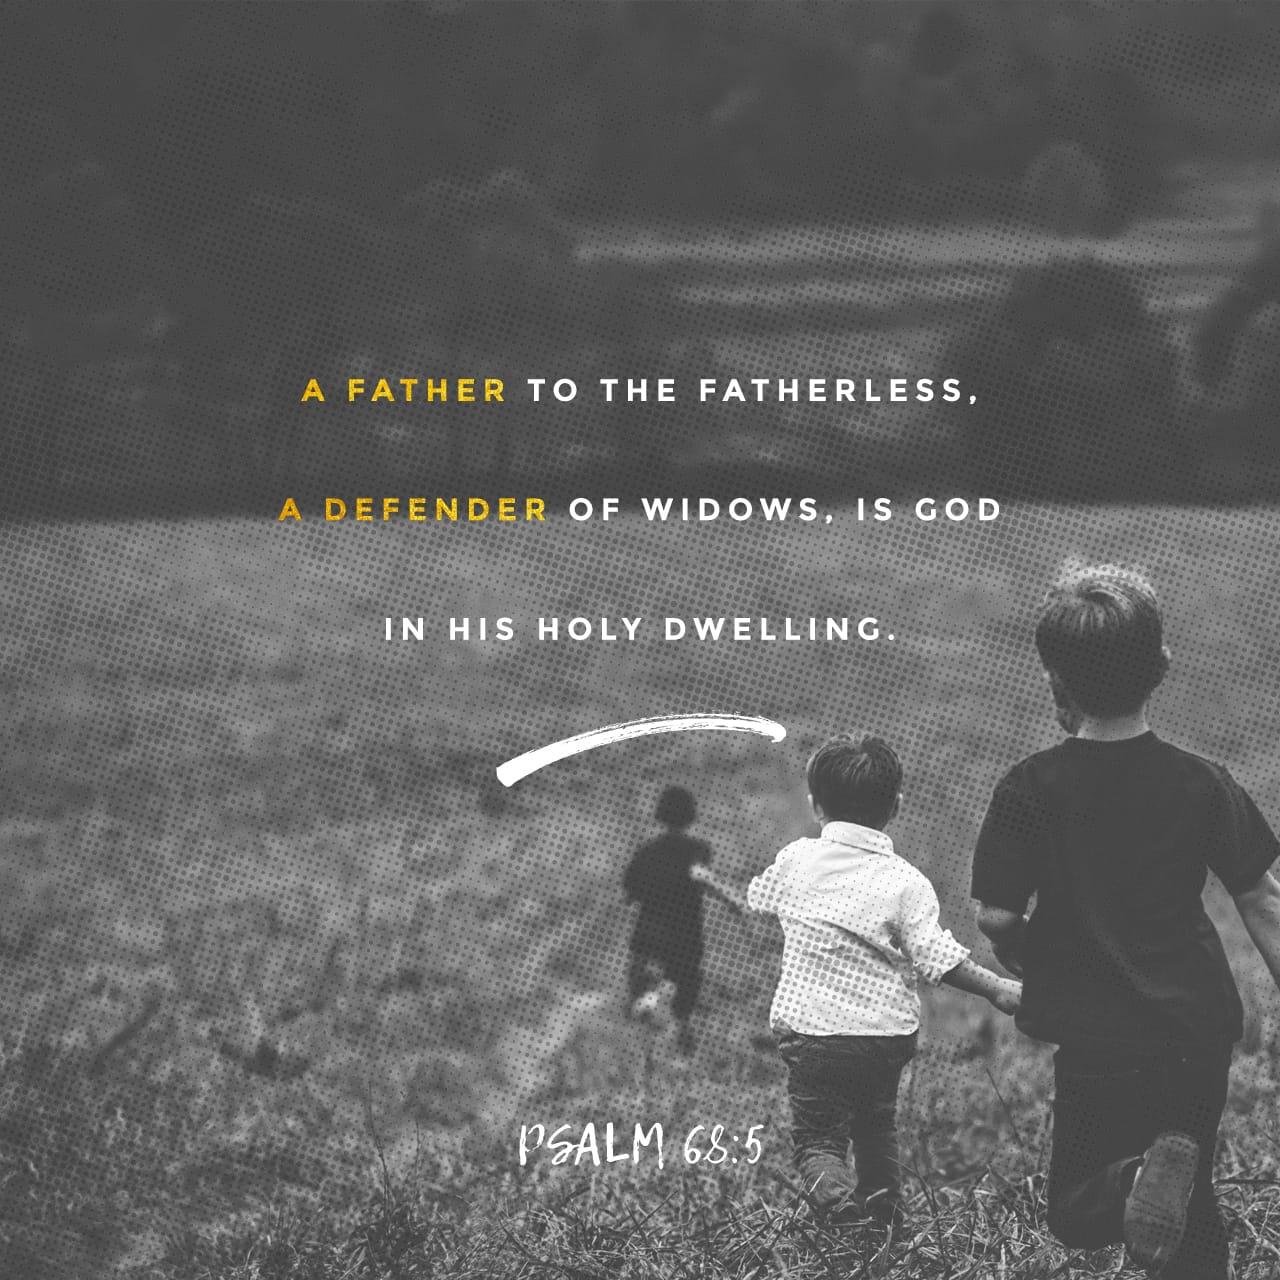 Bible Verse of the Day - day 89 - image 2257 (Psalm 68:1-35)